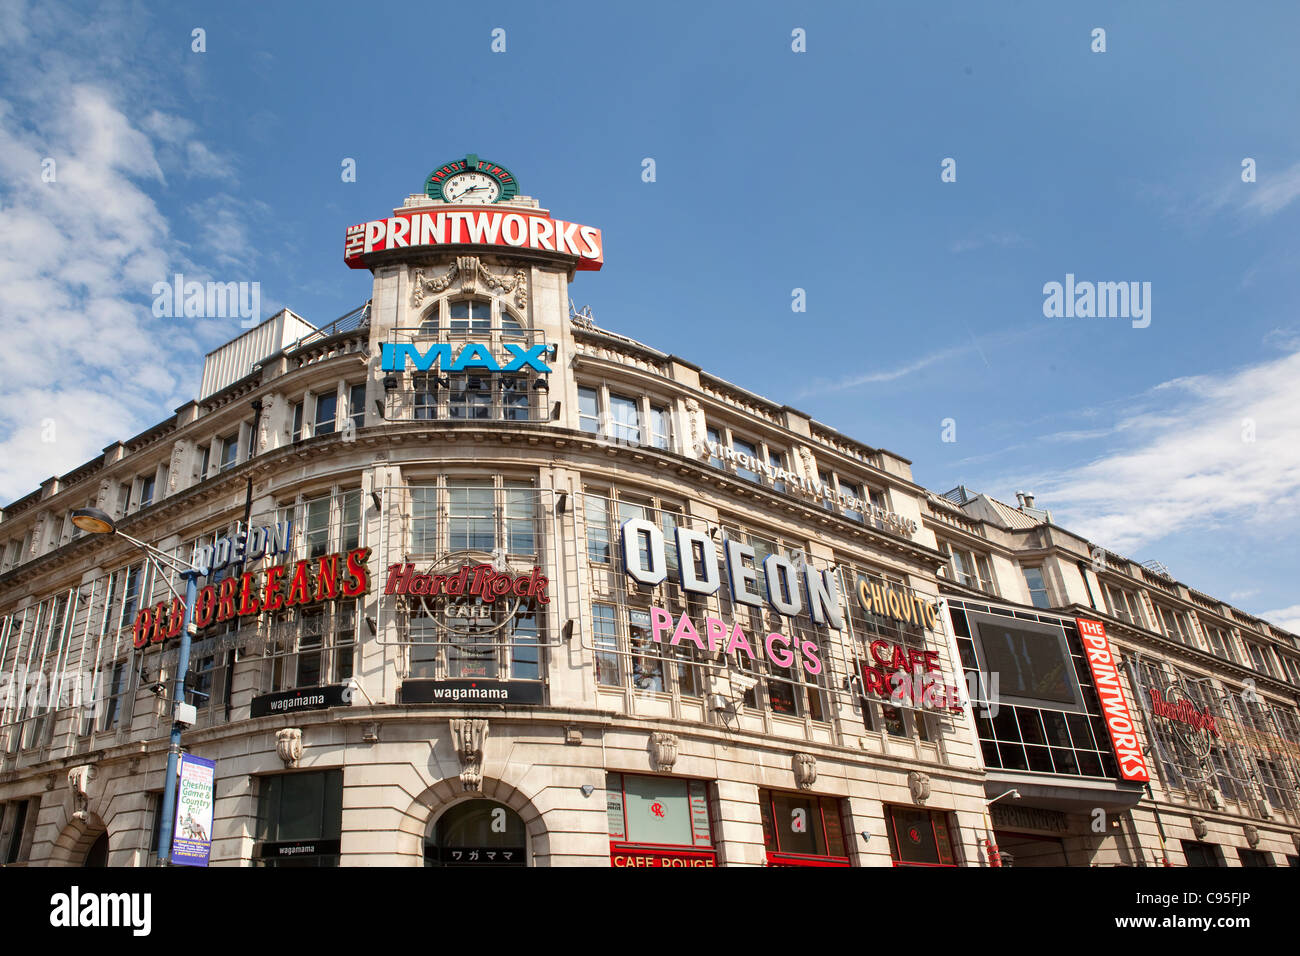 The Printworks building in Manchester. An entertainment centre with a cinema, Hardrock cafe, casino, bars and restaurants Stock Photo